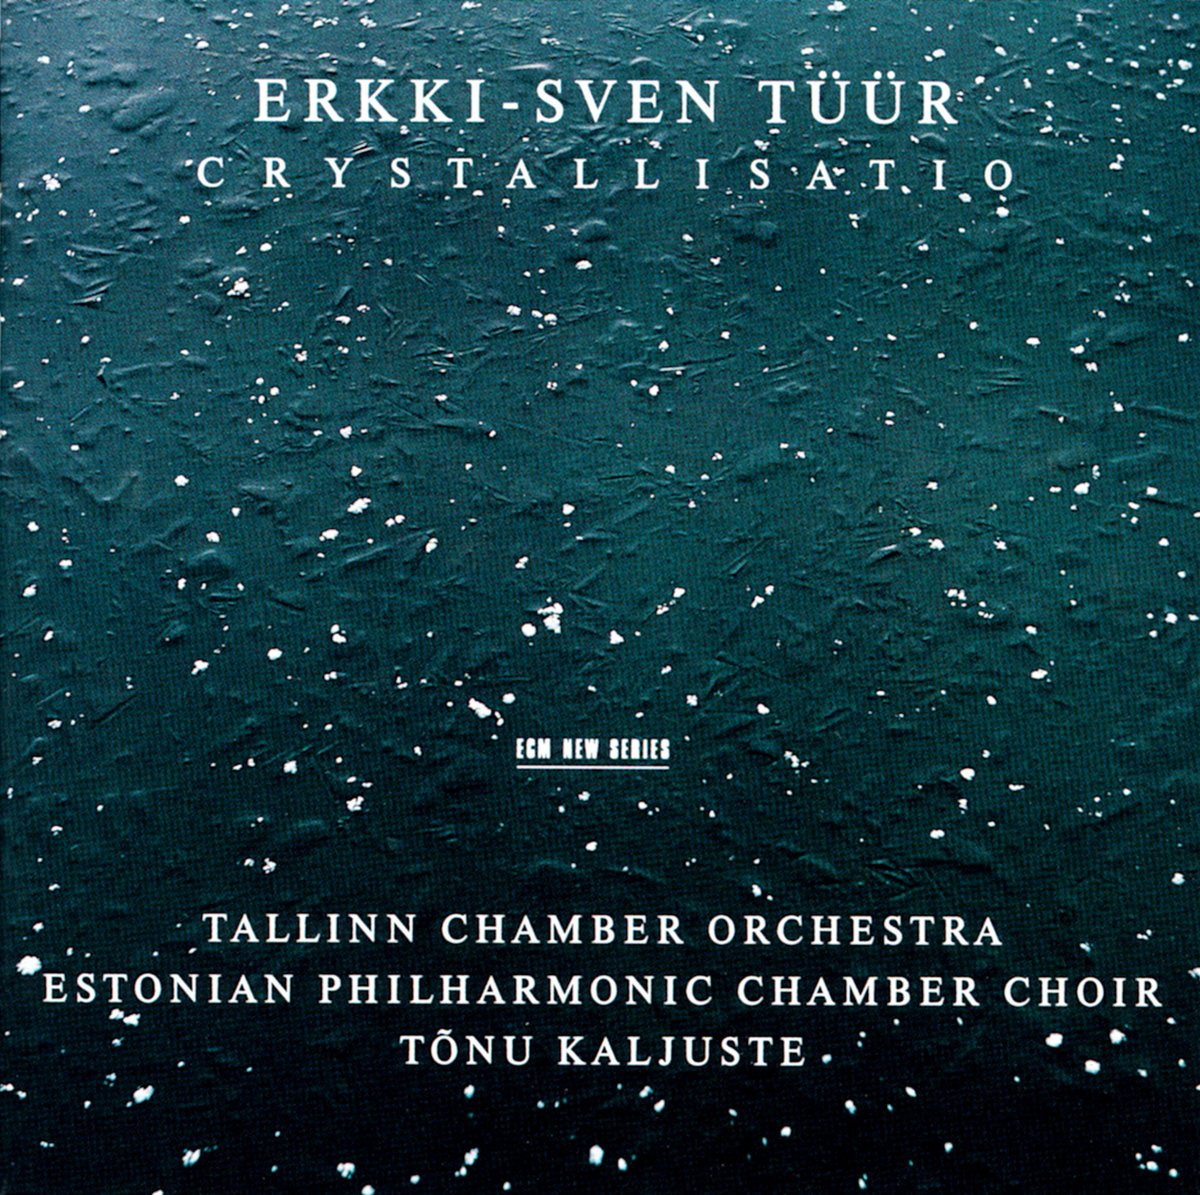 ++ ECM Timeline ++ On “Crystallisatio”, a collection of five Tüür works from the nineties, “Tonu Kaljuste conducts glittering performances in a full, reverberant sound balance”, to quote a review in BBC Music Magazine from 1996.